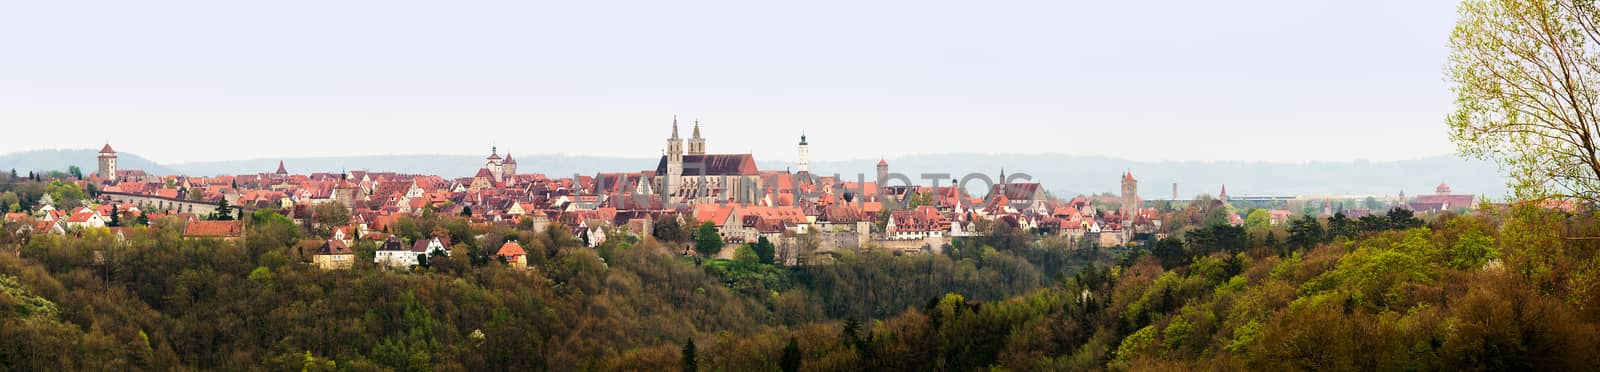 High definition broad panoramic skyline view of Rothenburg ob der Tauber in Germany showing the roofs and towers of the ancient city